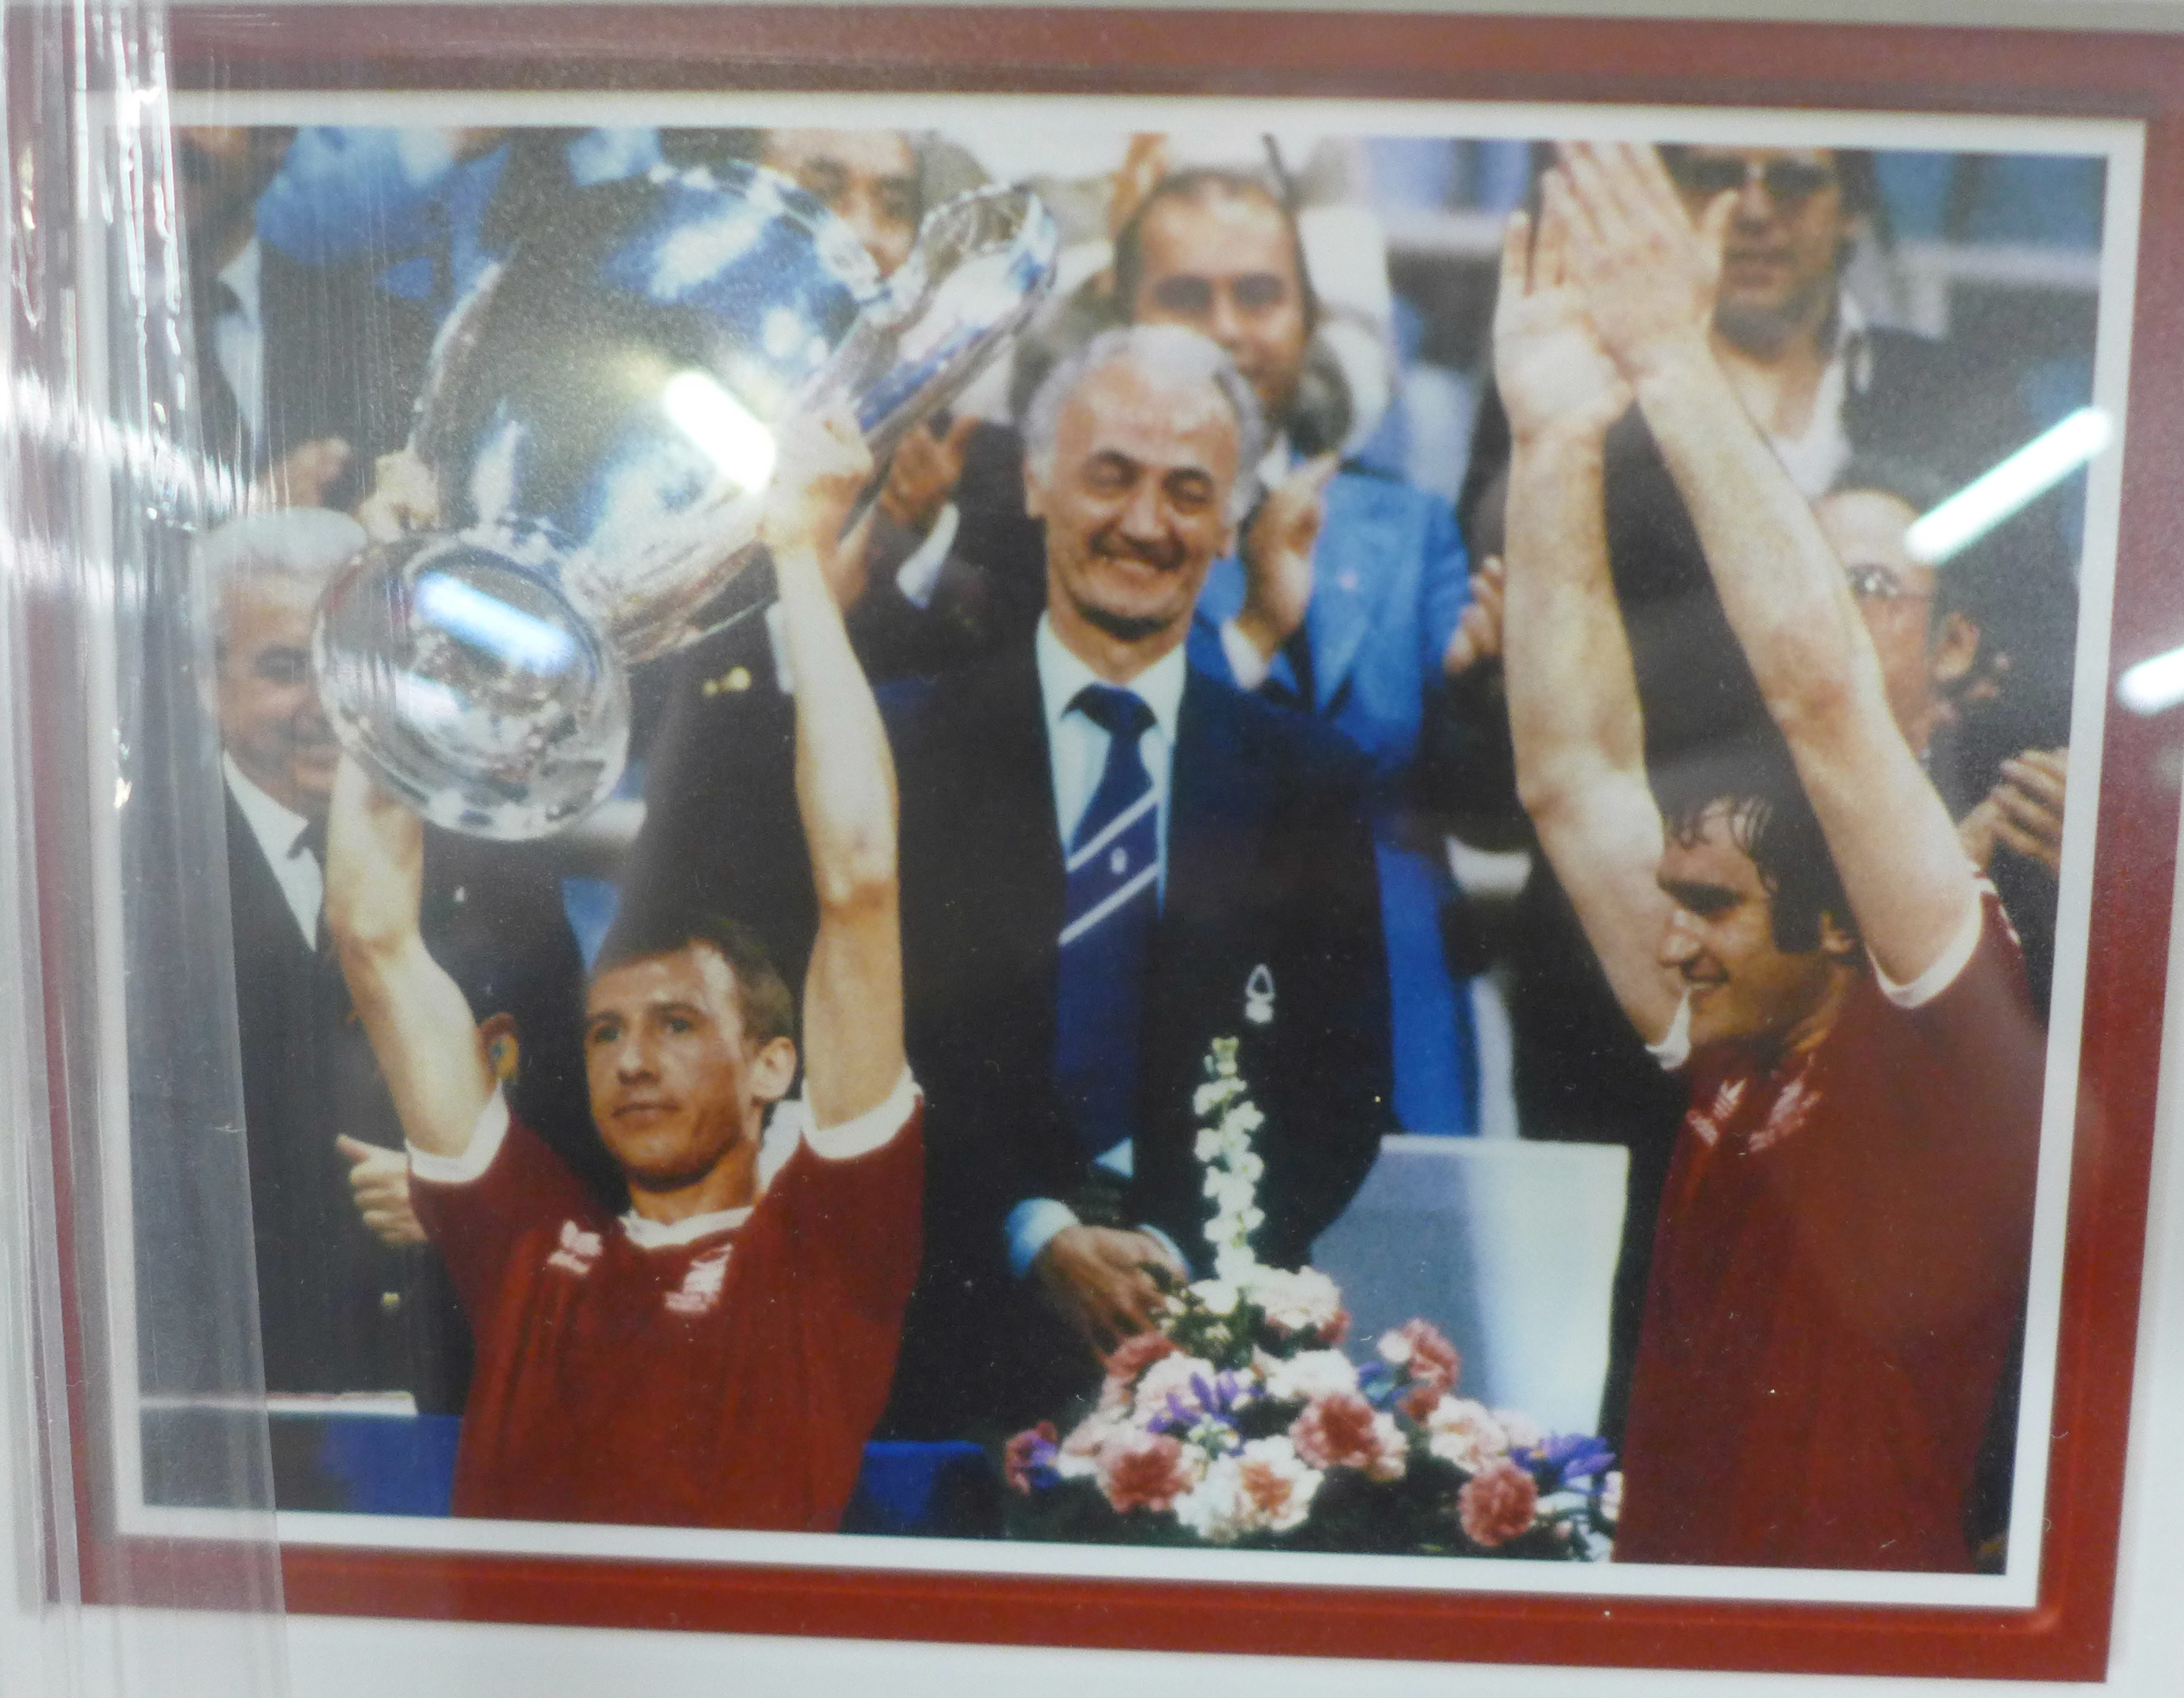 Nottingham Forest, framed and mounted pictures from the 1979 European Cup Final, one picture - Image 2 of 6